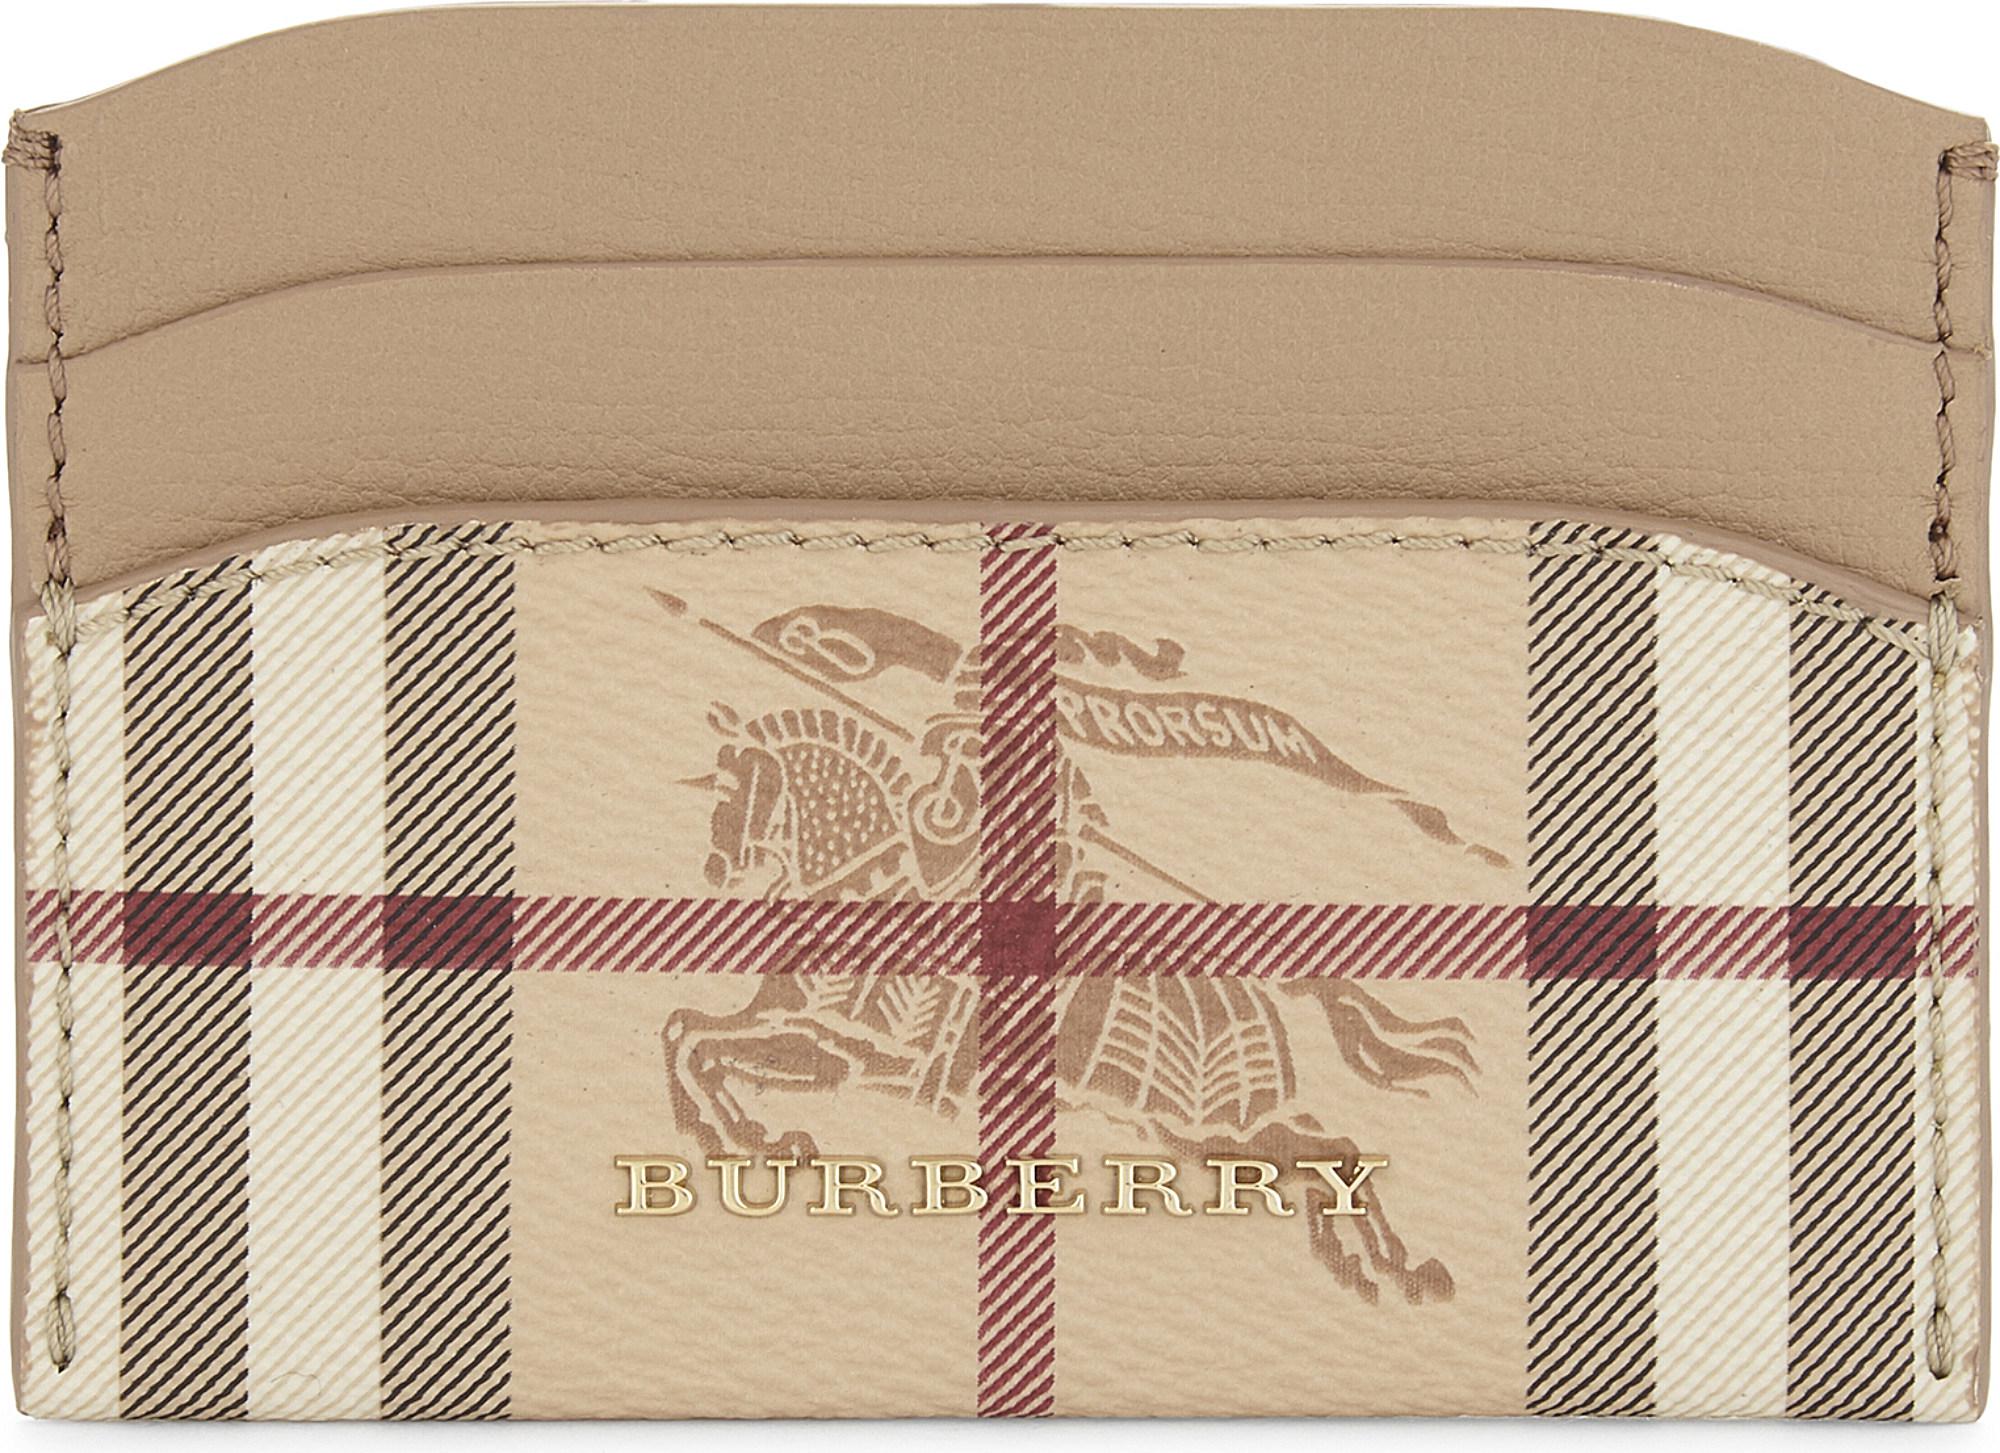 Used burberry leather card holder - LEATHER